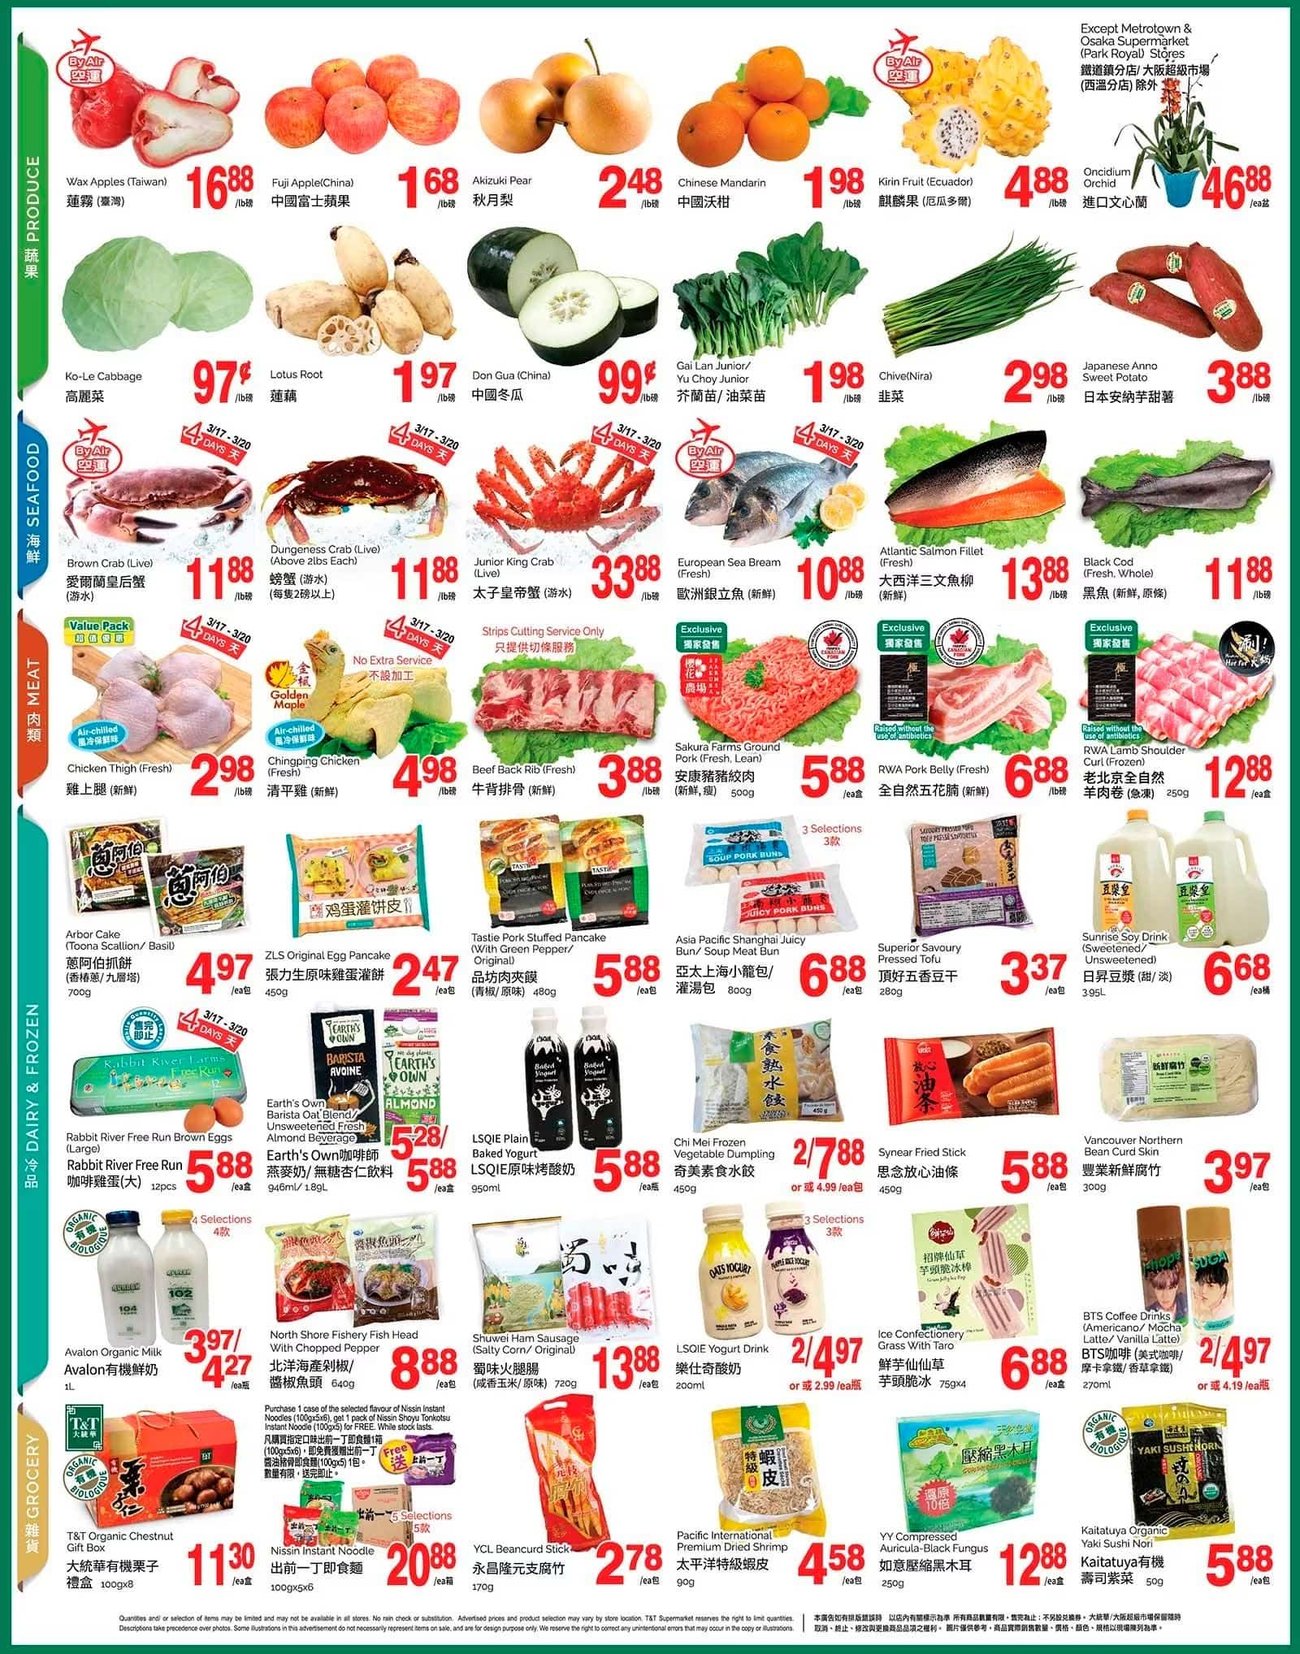 T & T Supermarket - British Columbia - Weekly Flyer Specials - Page 2